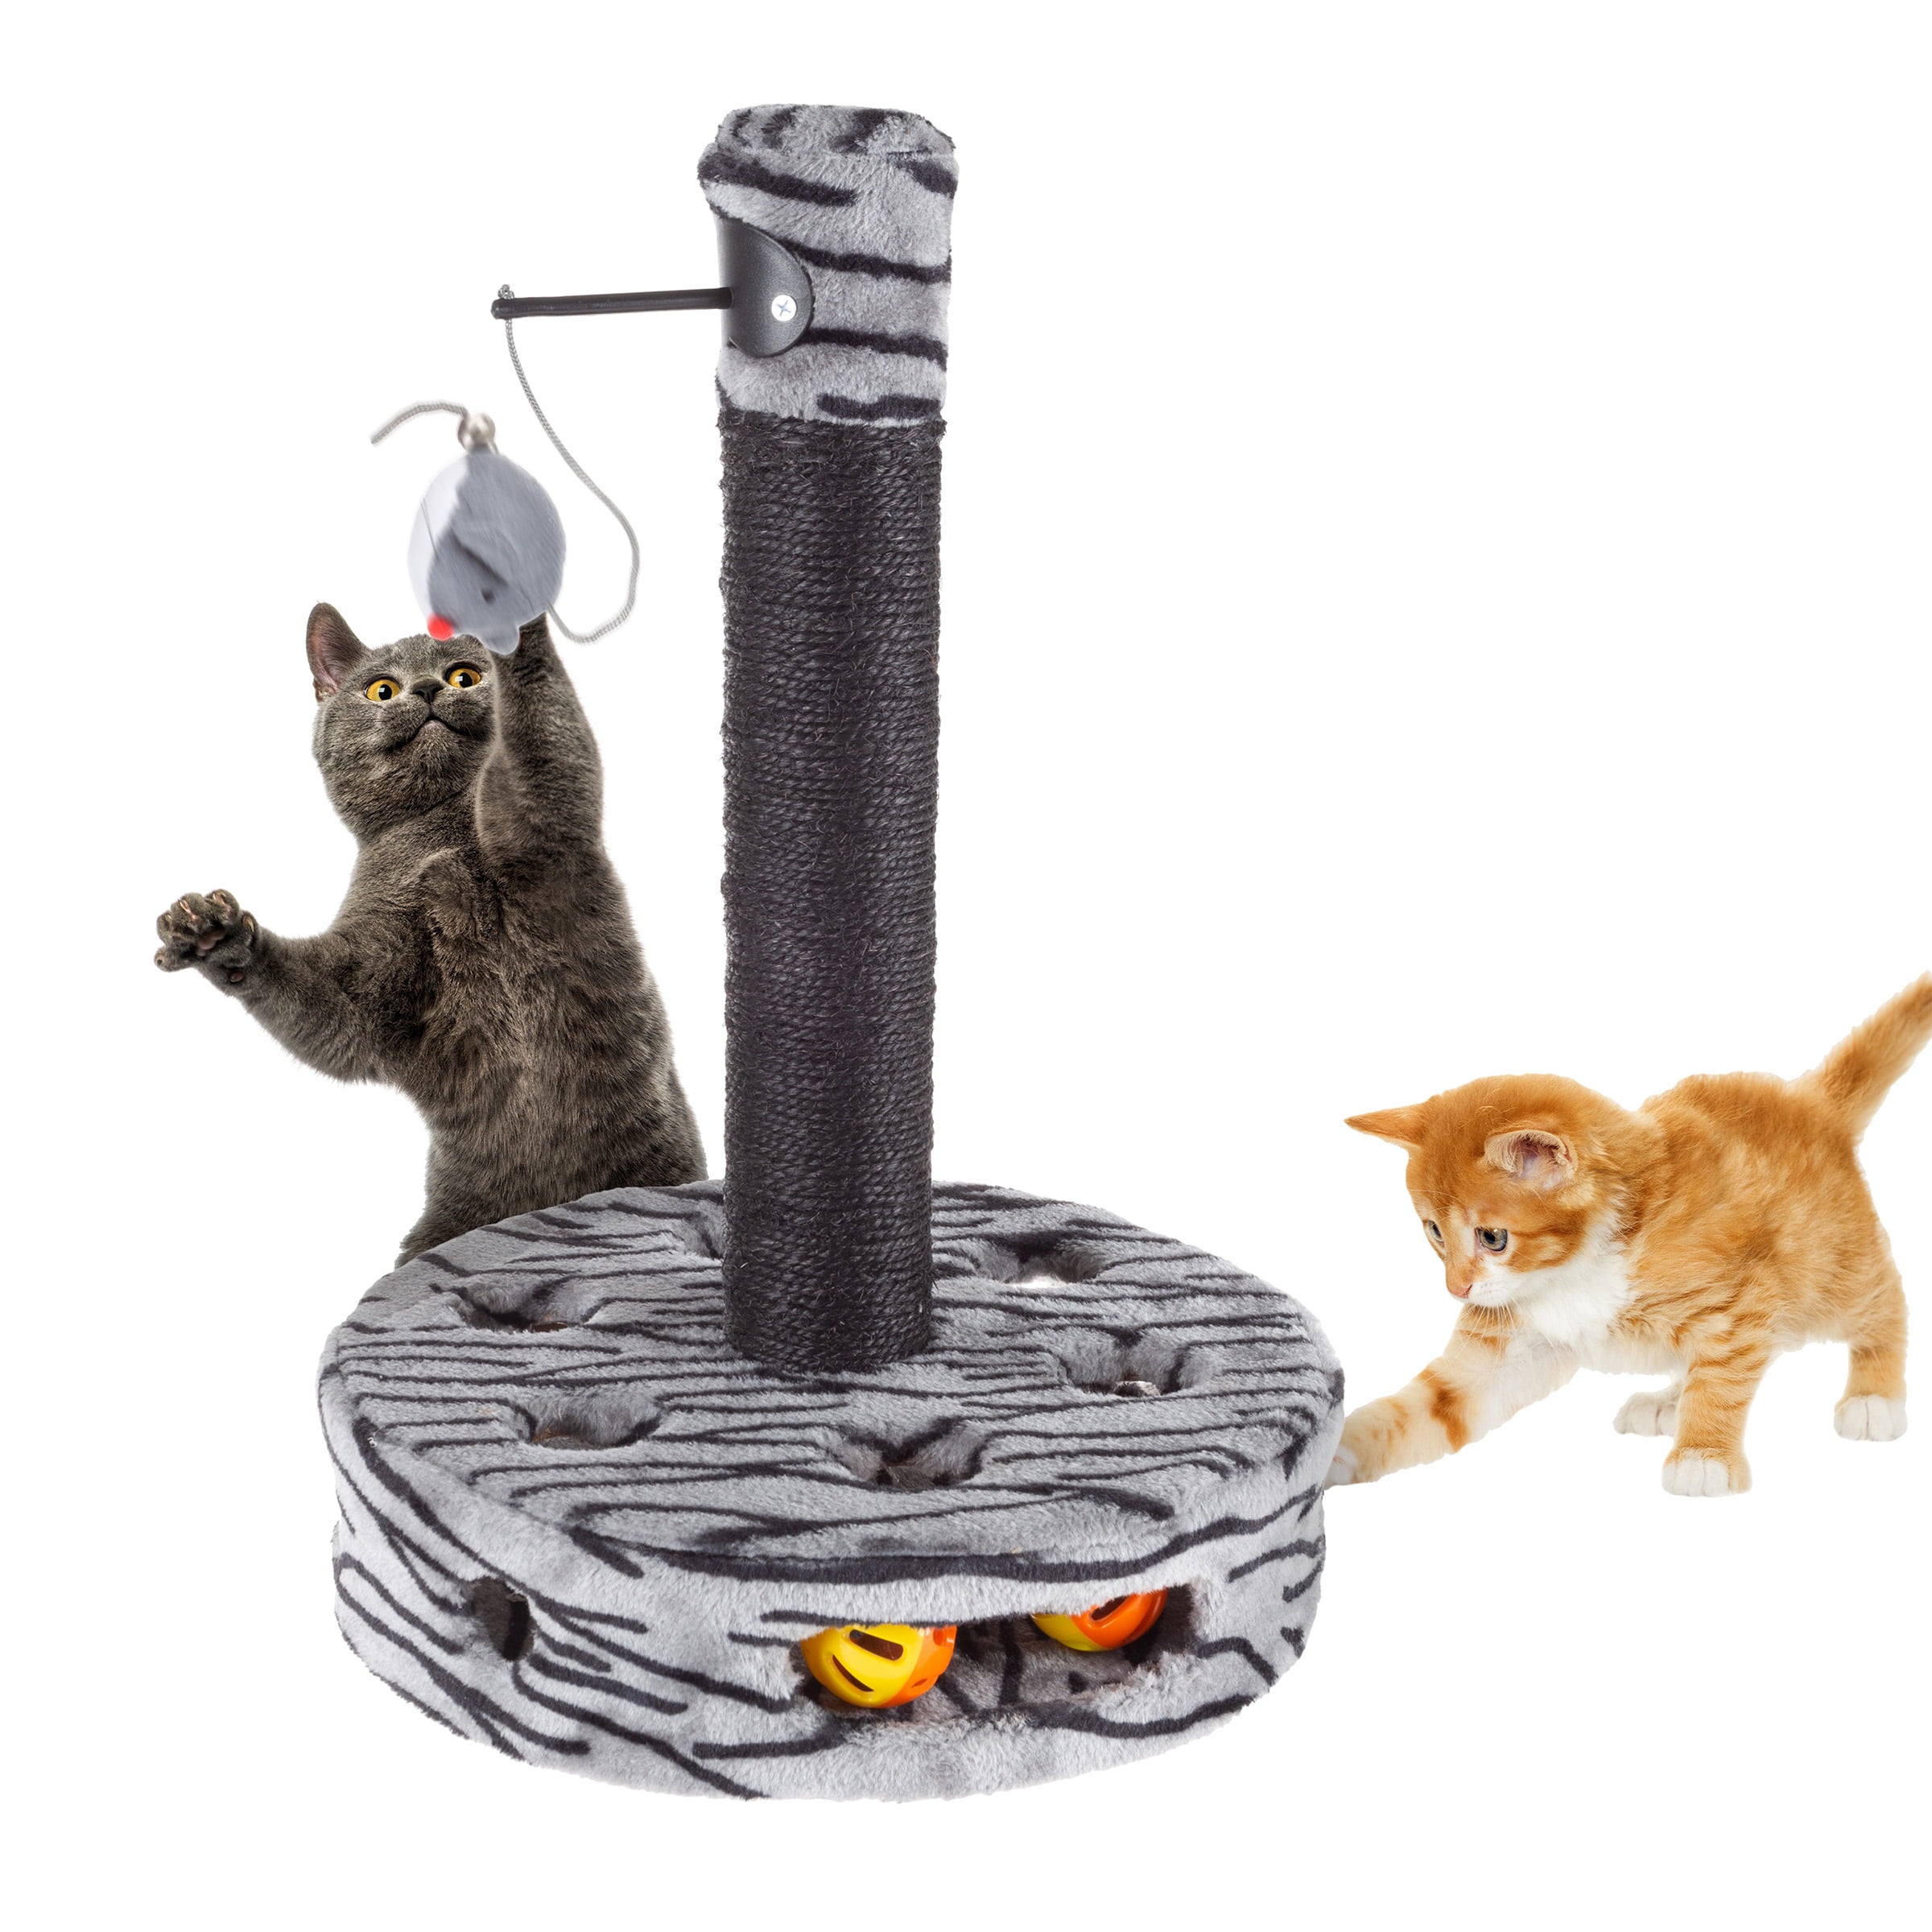 Wellhome Cat Tower Cat Tree Activity Centre Sisal Covered Cat Scratch Post with Hammock Perches Platform and Toy Mouse 120cm Grey